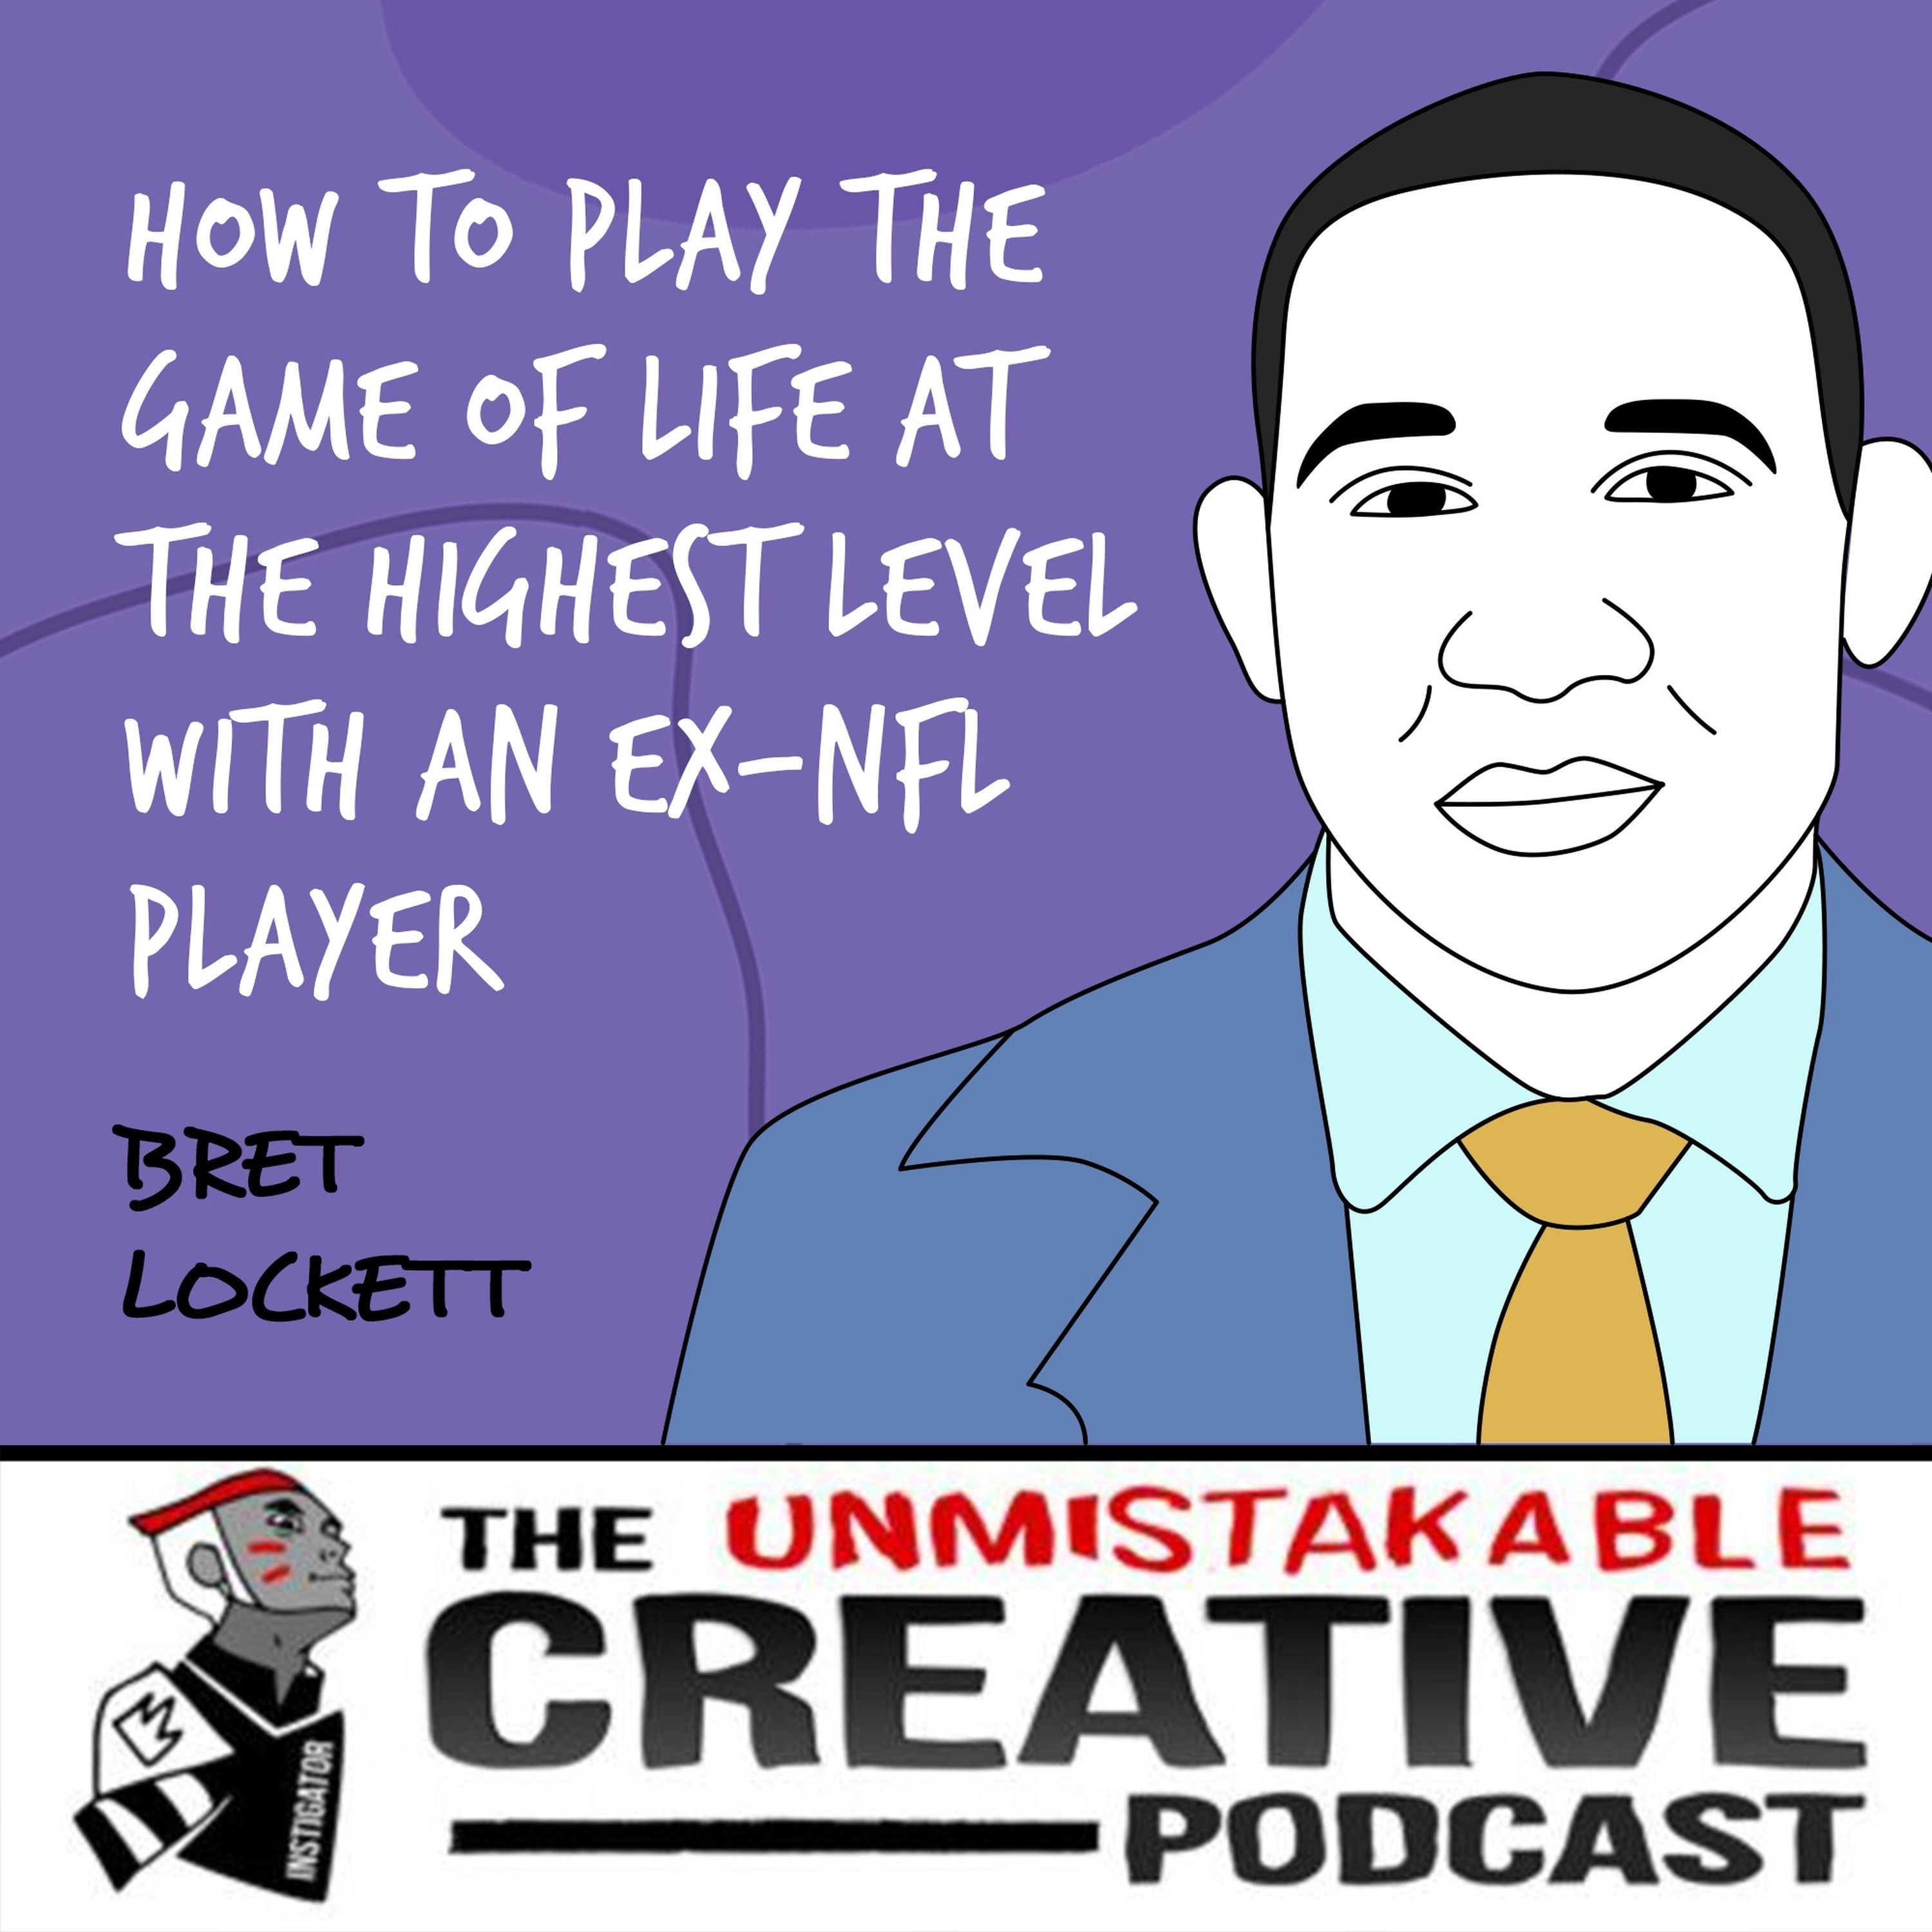 Listener Favorites: Bret Lockett | How to Play The Game of Life at The Highest Level